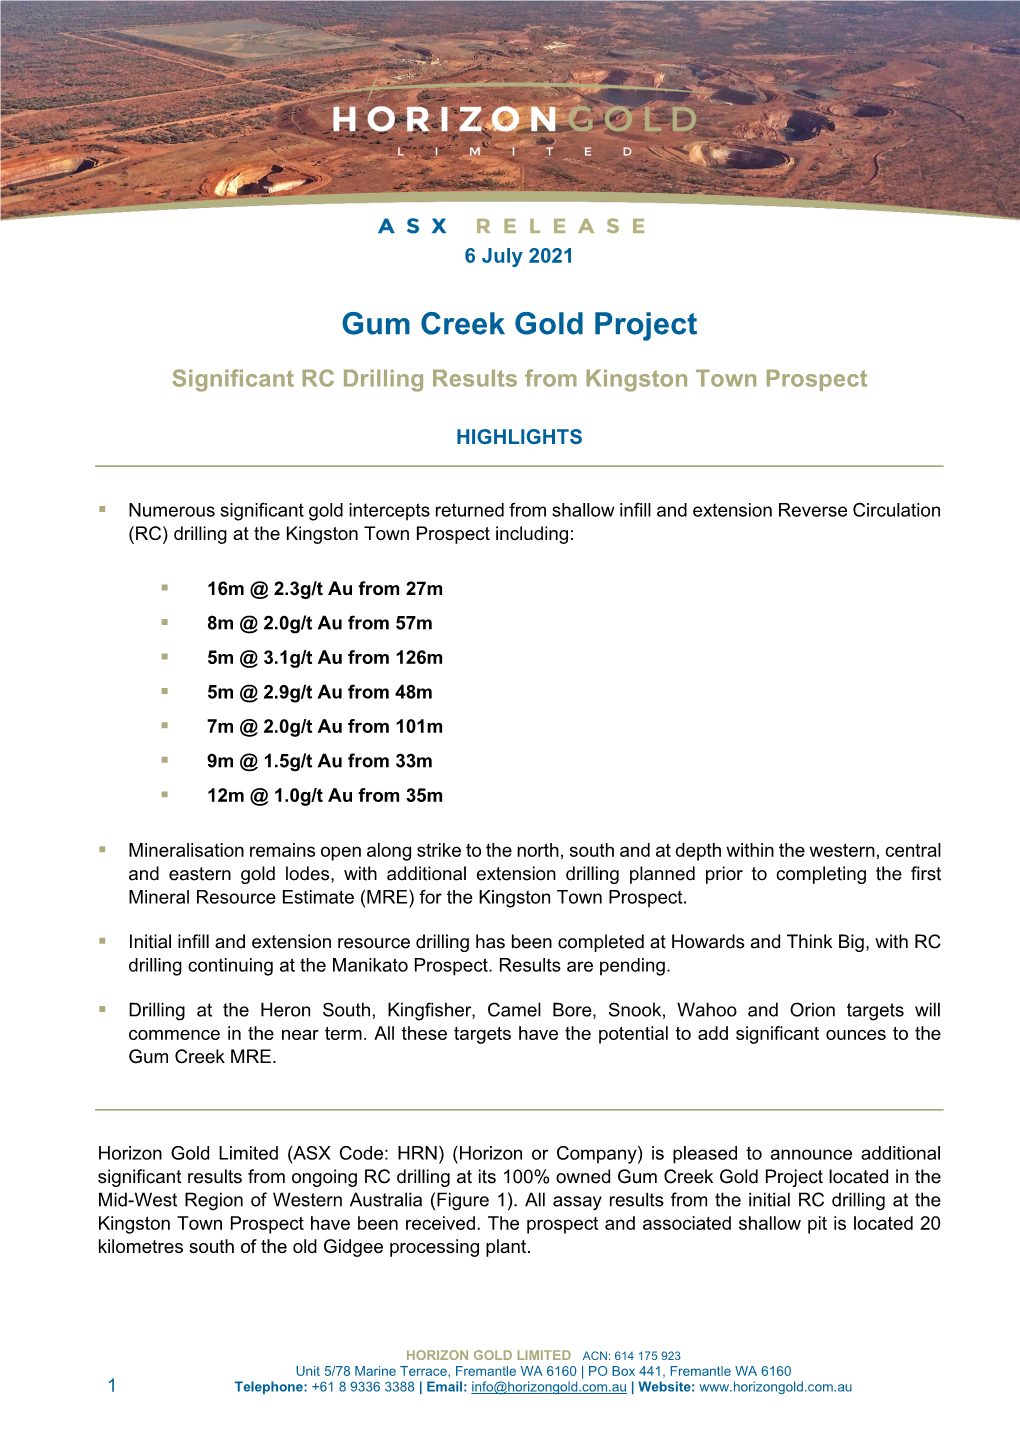 Significant RC Drilling Results from Kingston Town Prospect